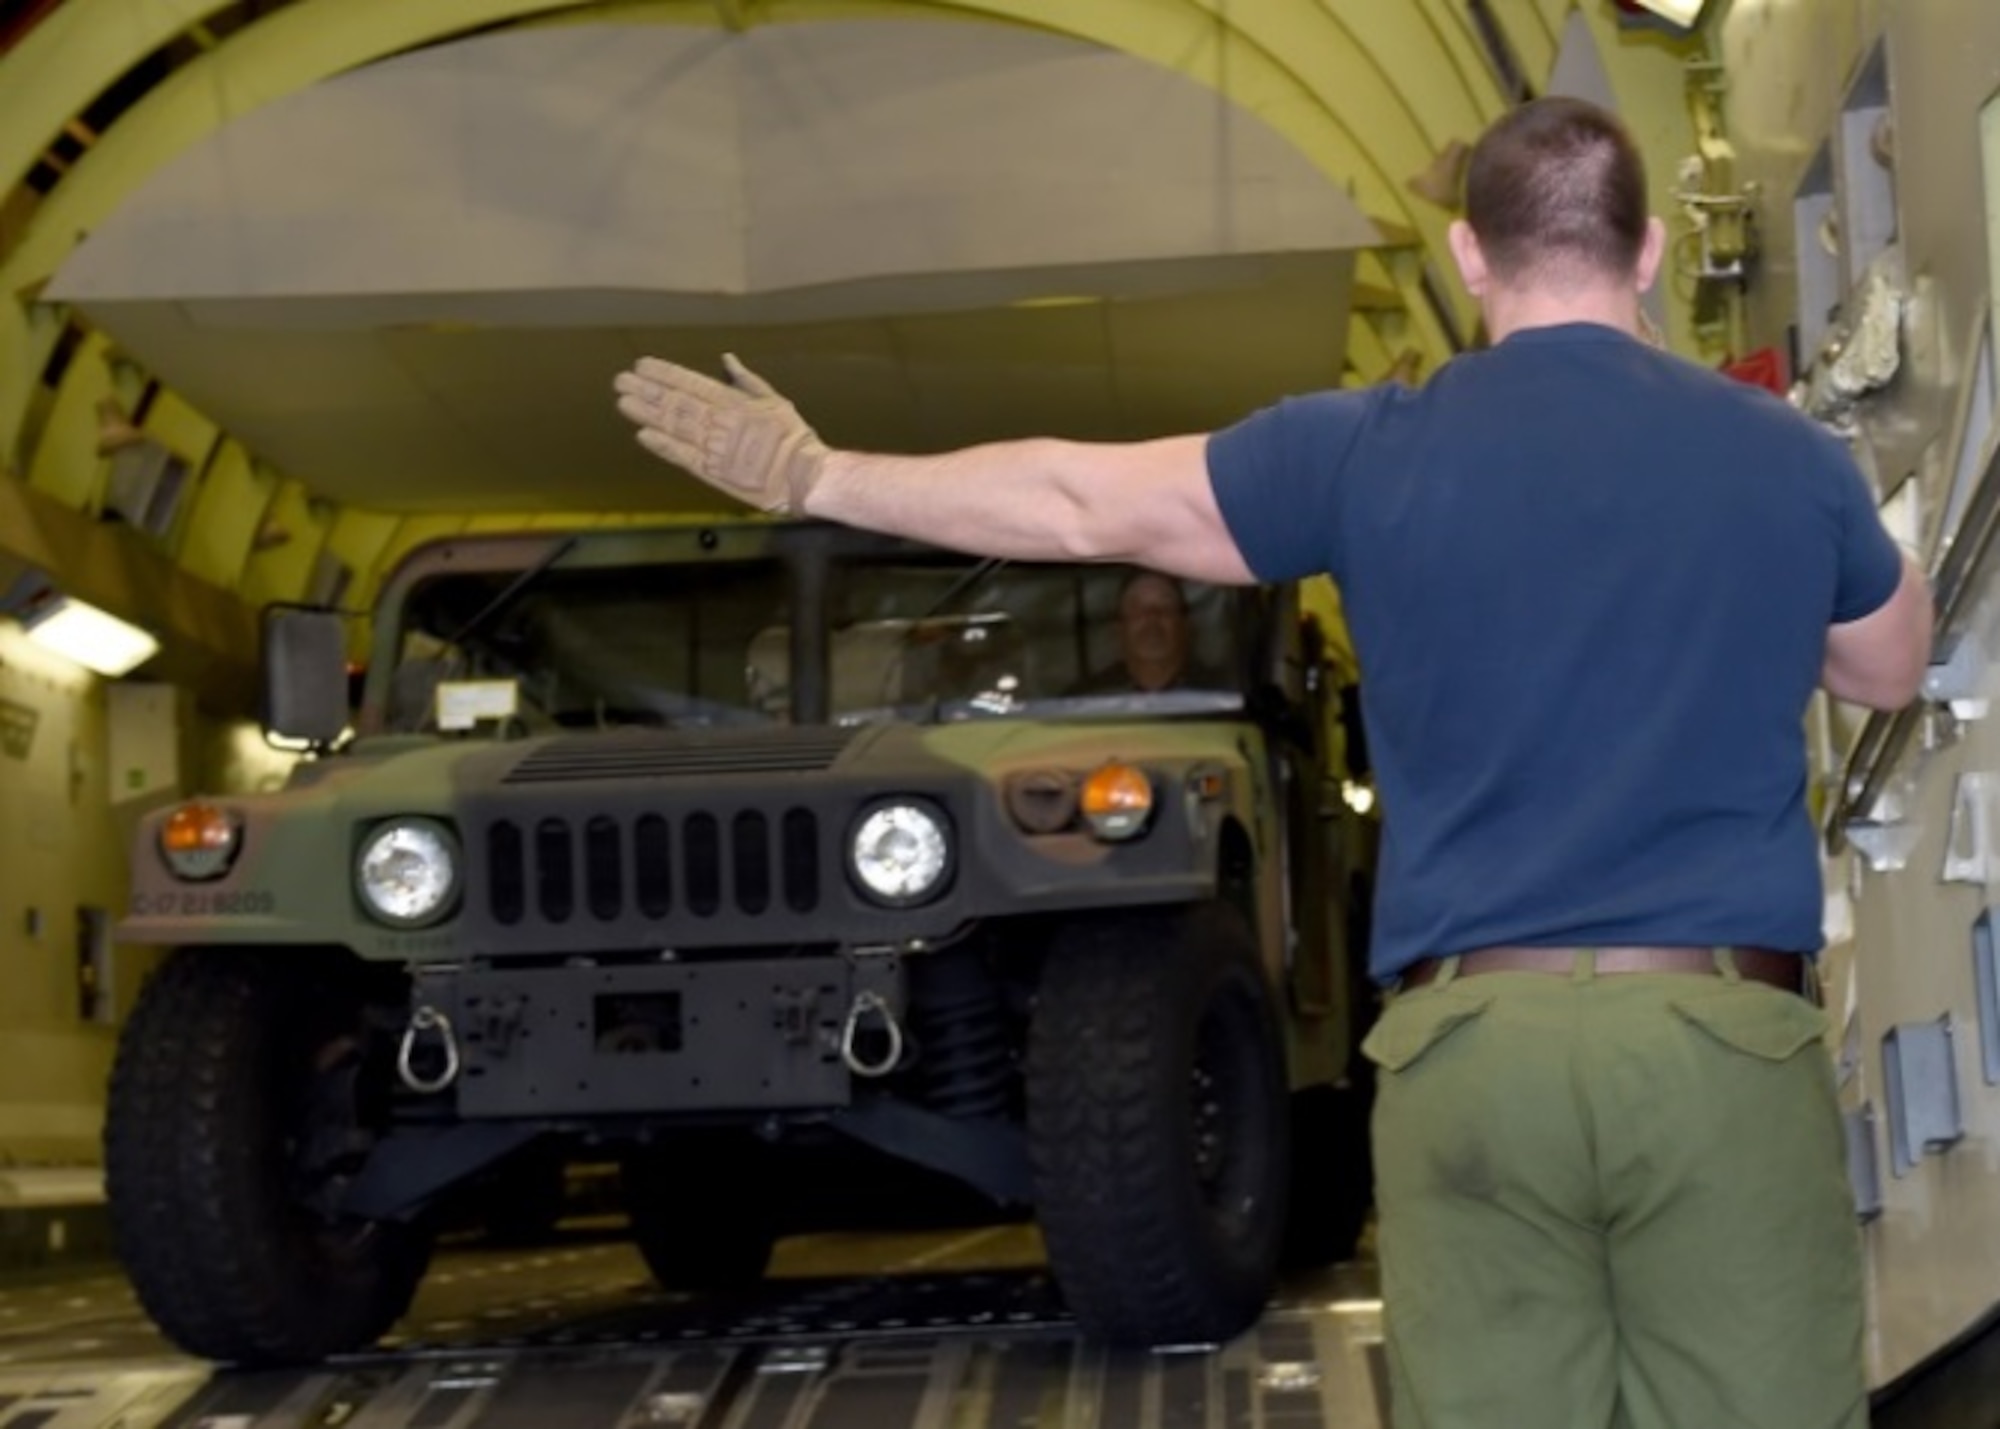 Royal Canadian air force Master Corporal Derek Bristol, C-17 Globemaster III cargo aircraft loadmaster trainee, directs a Humvee off a C-17 cargo simulator, Altus Air Force Base, Okla., Dec. 16, 2015. Training international students helps improve joint nation missions with uniformed knowledge and operations. (U.S. Air Force photo by Airman 1st Class Kirby Turbak/Released)